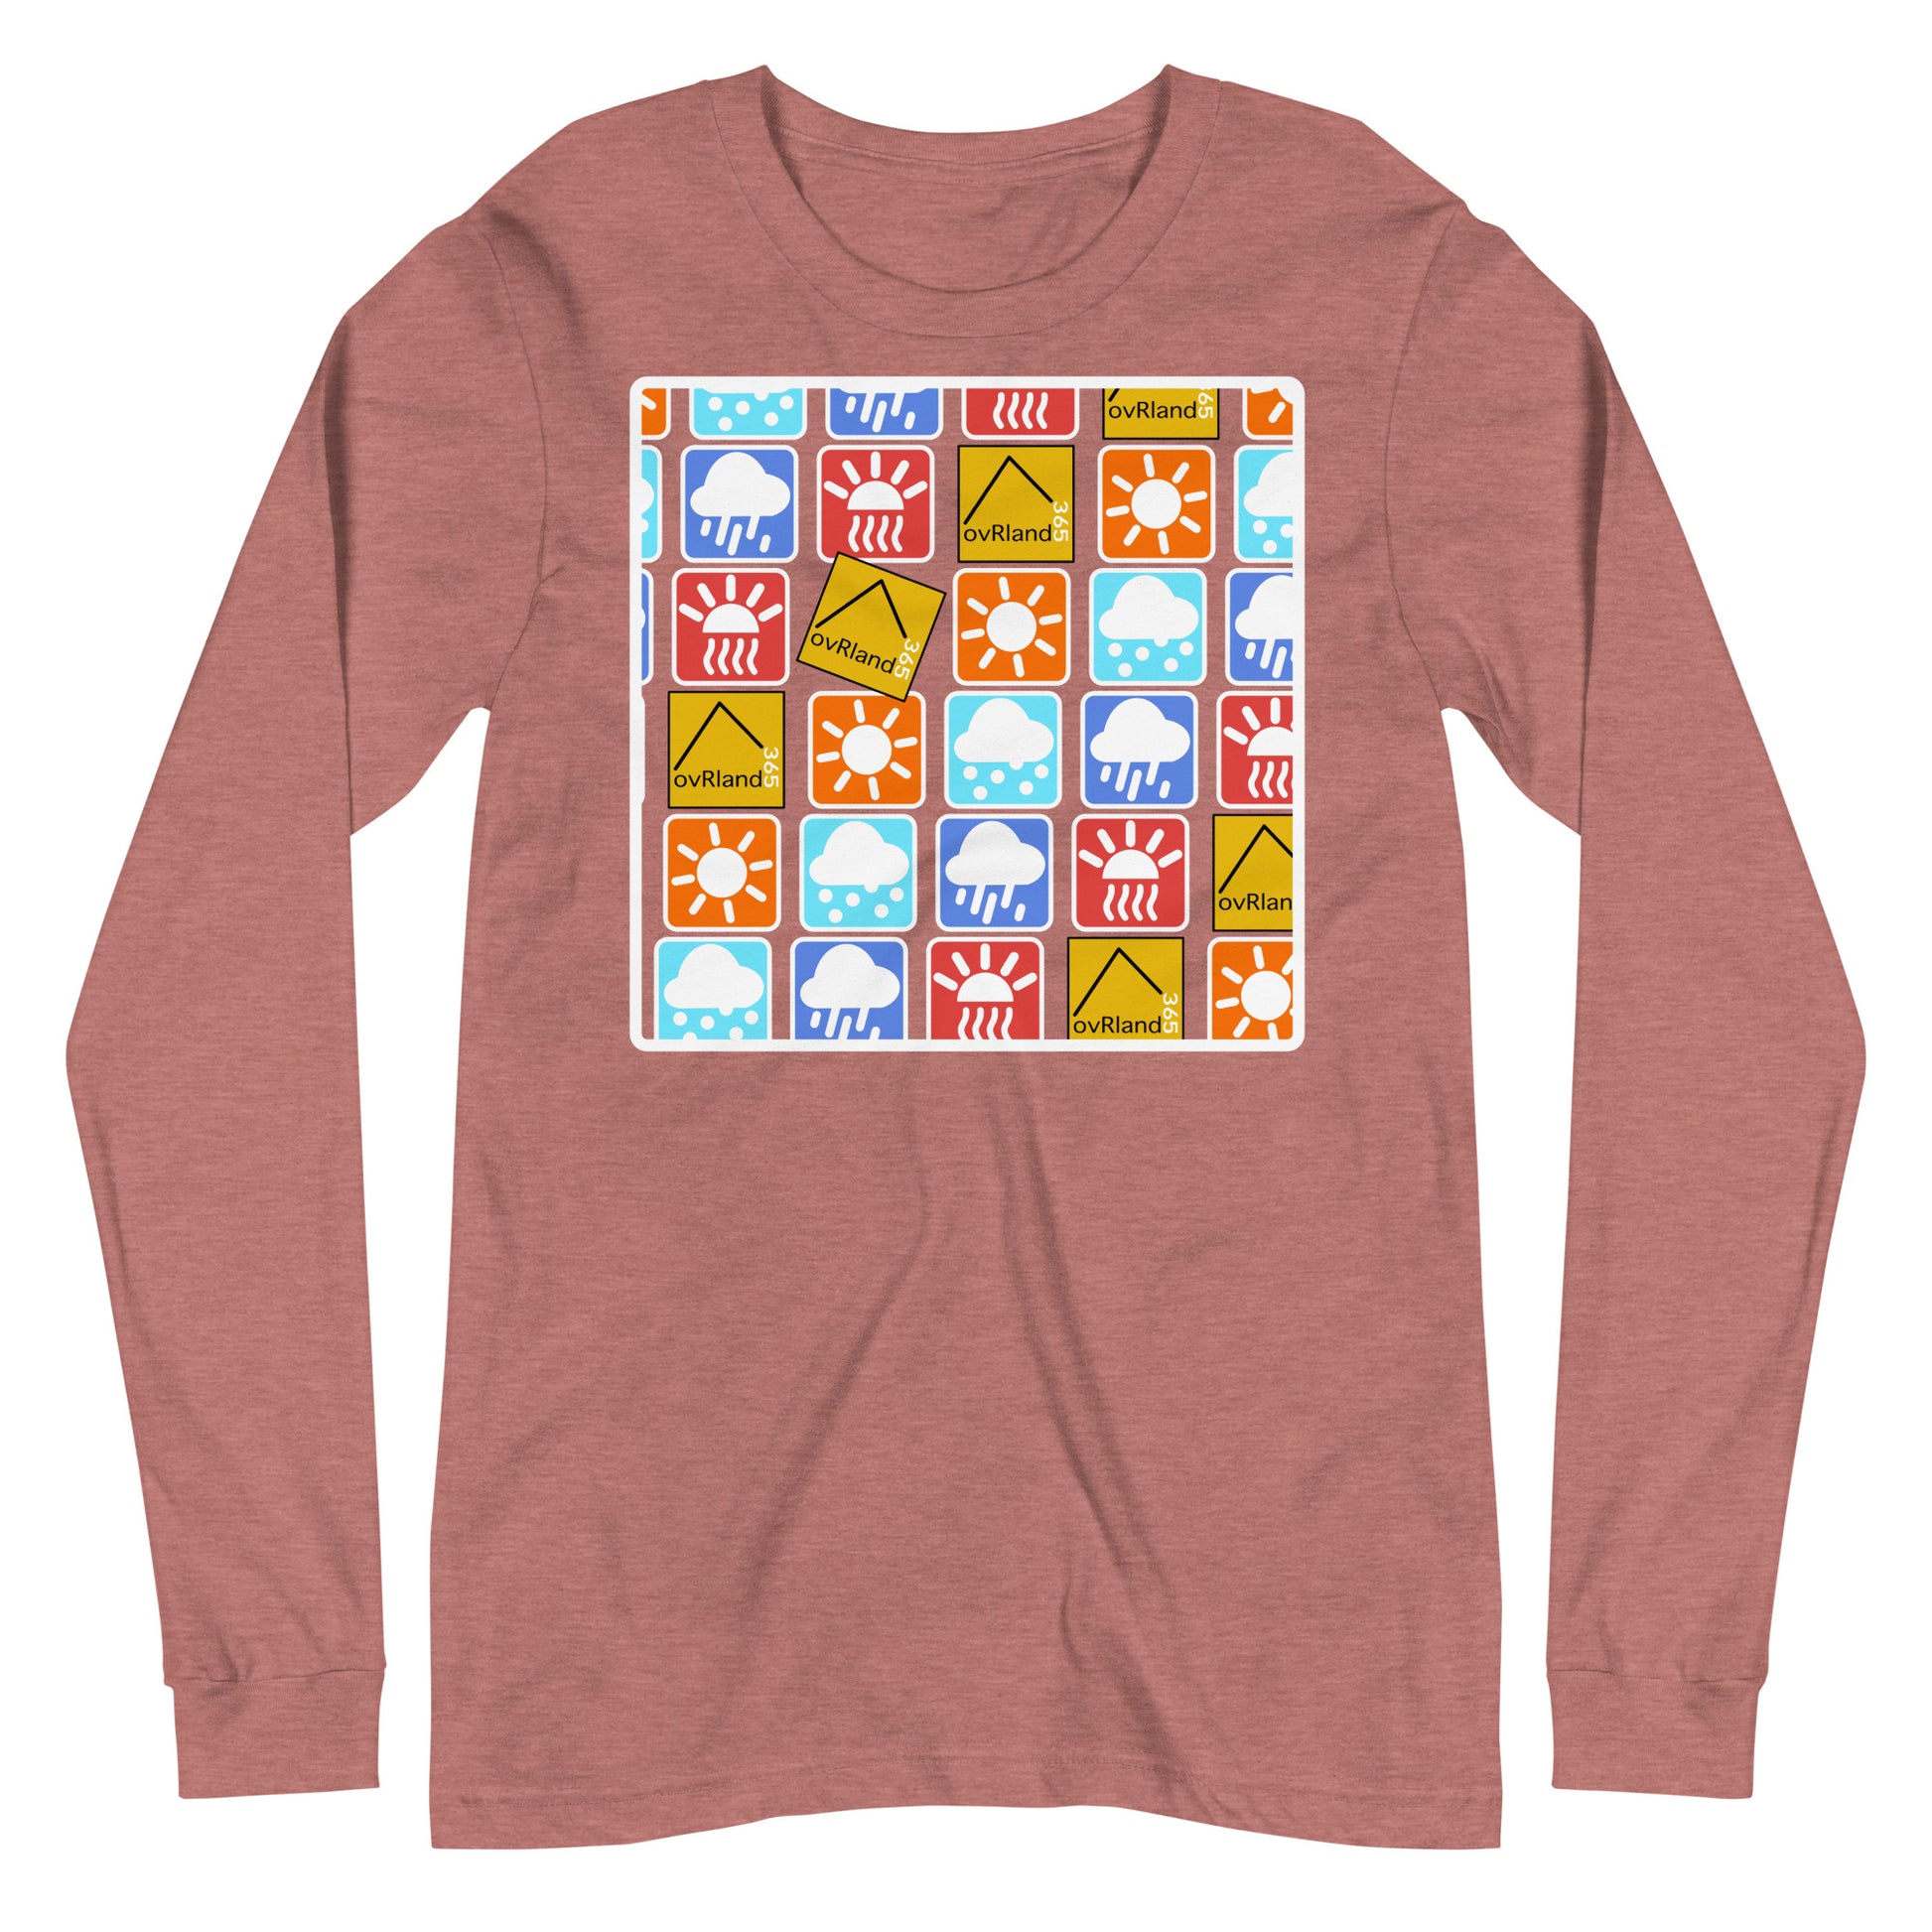 Overland 365 - Weather Icons. Pink Long-sleeve. overland365.com